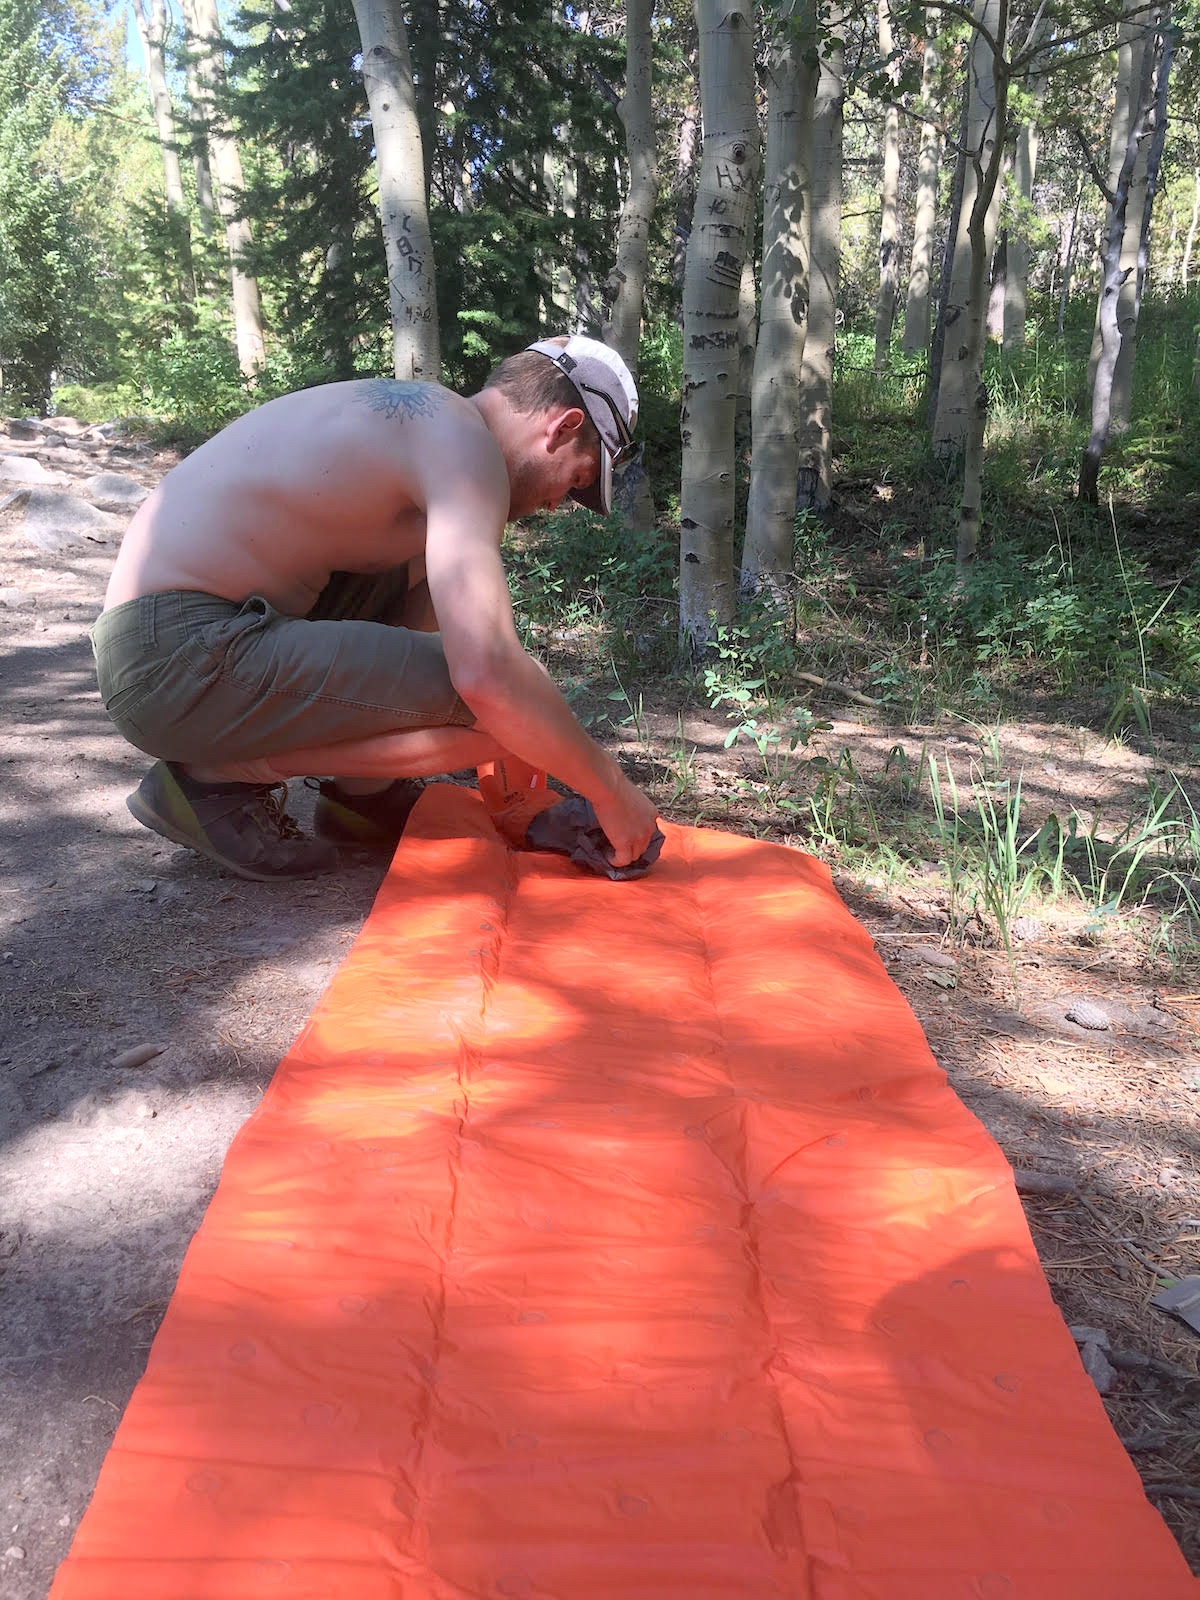 The author setting up the pump sack for the Sea to Summit Ultralight Air Mat. After a small amount of practice, three pumps are plenty to inflate the mattress. [Photo] Amanda Franz